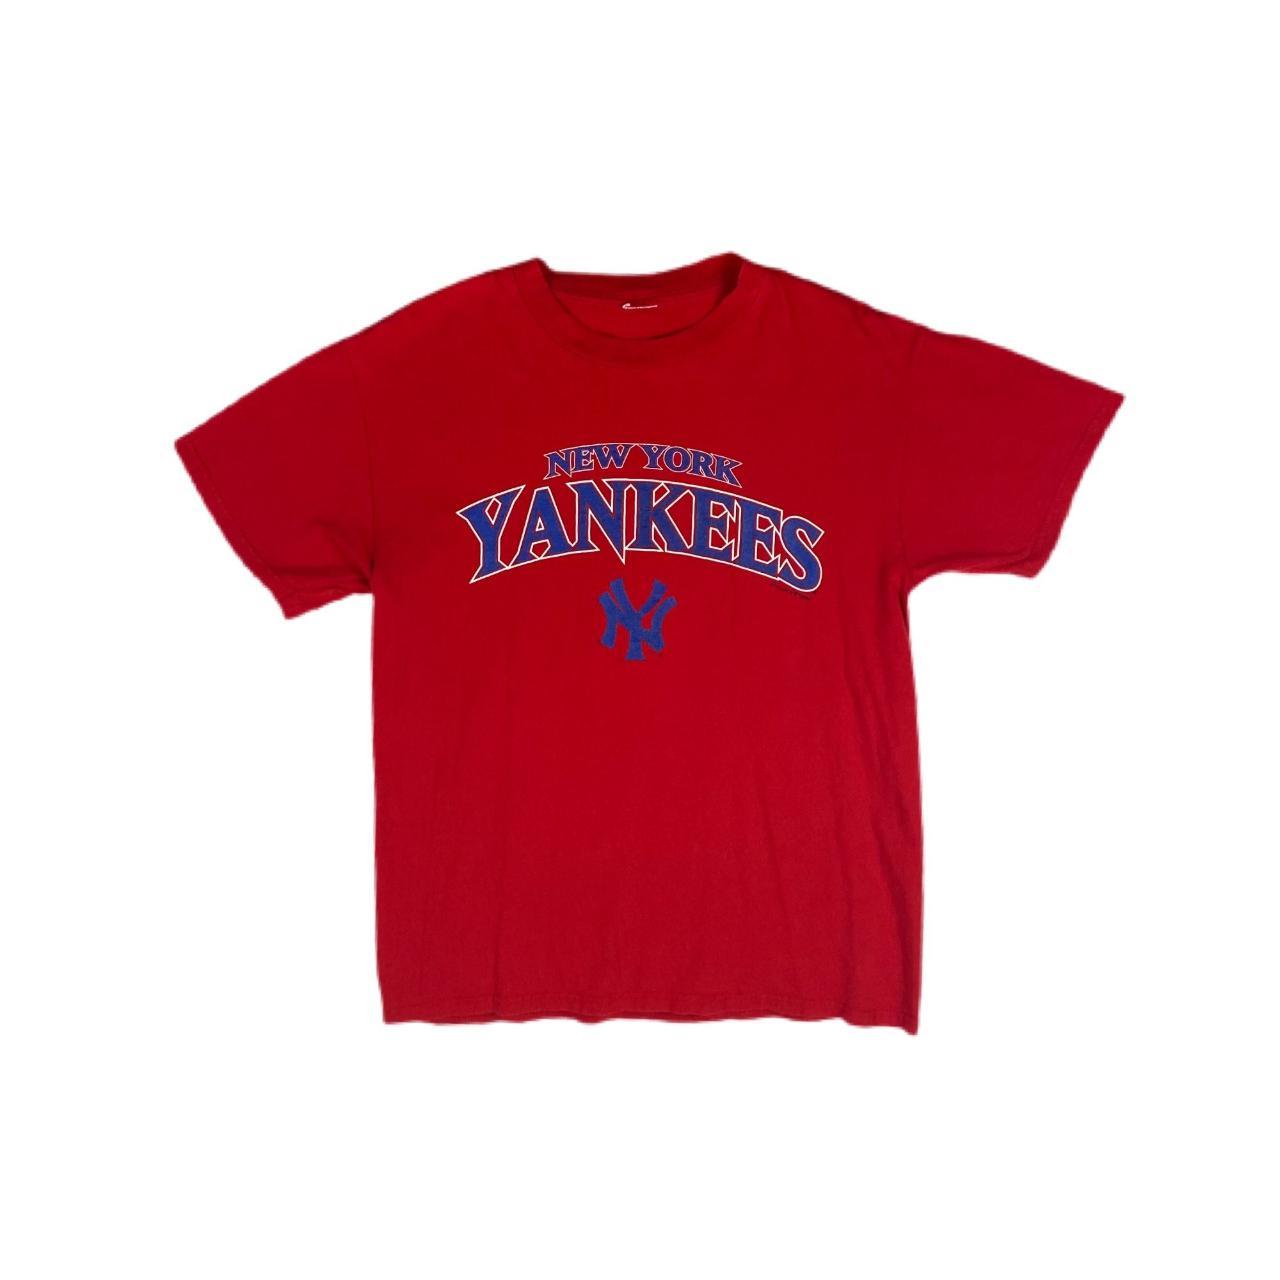 Product Image 1 - New York Yankees Tee fits